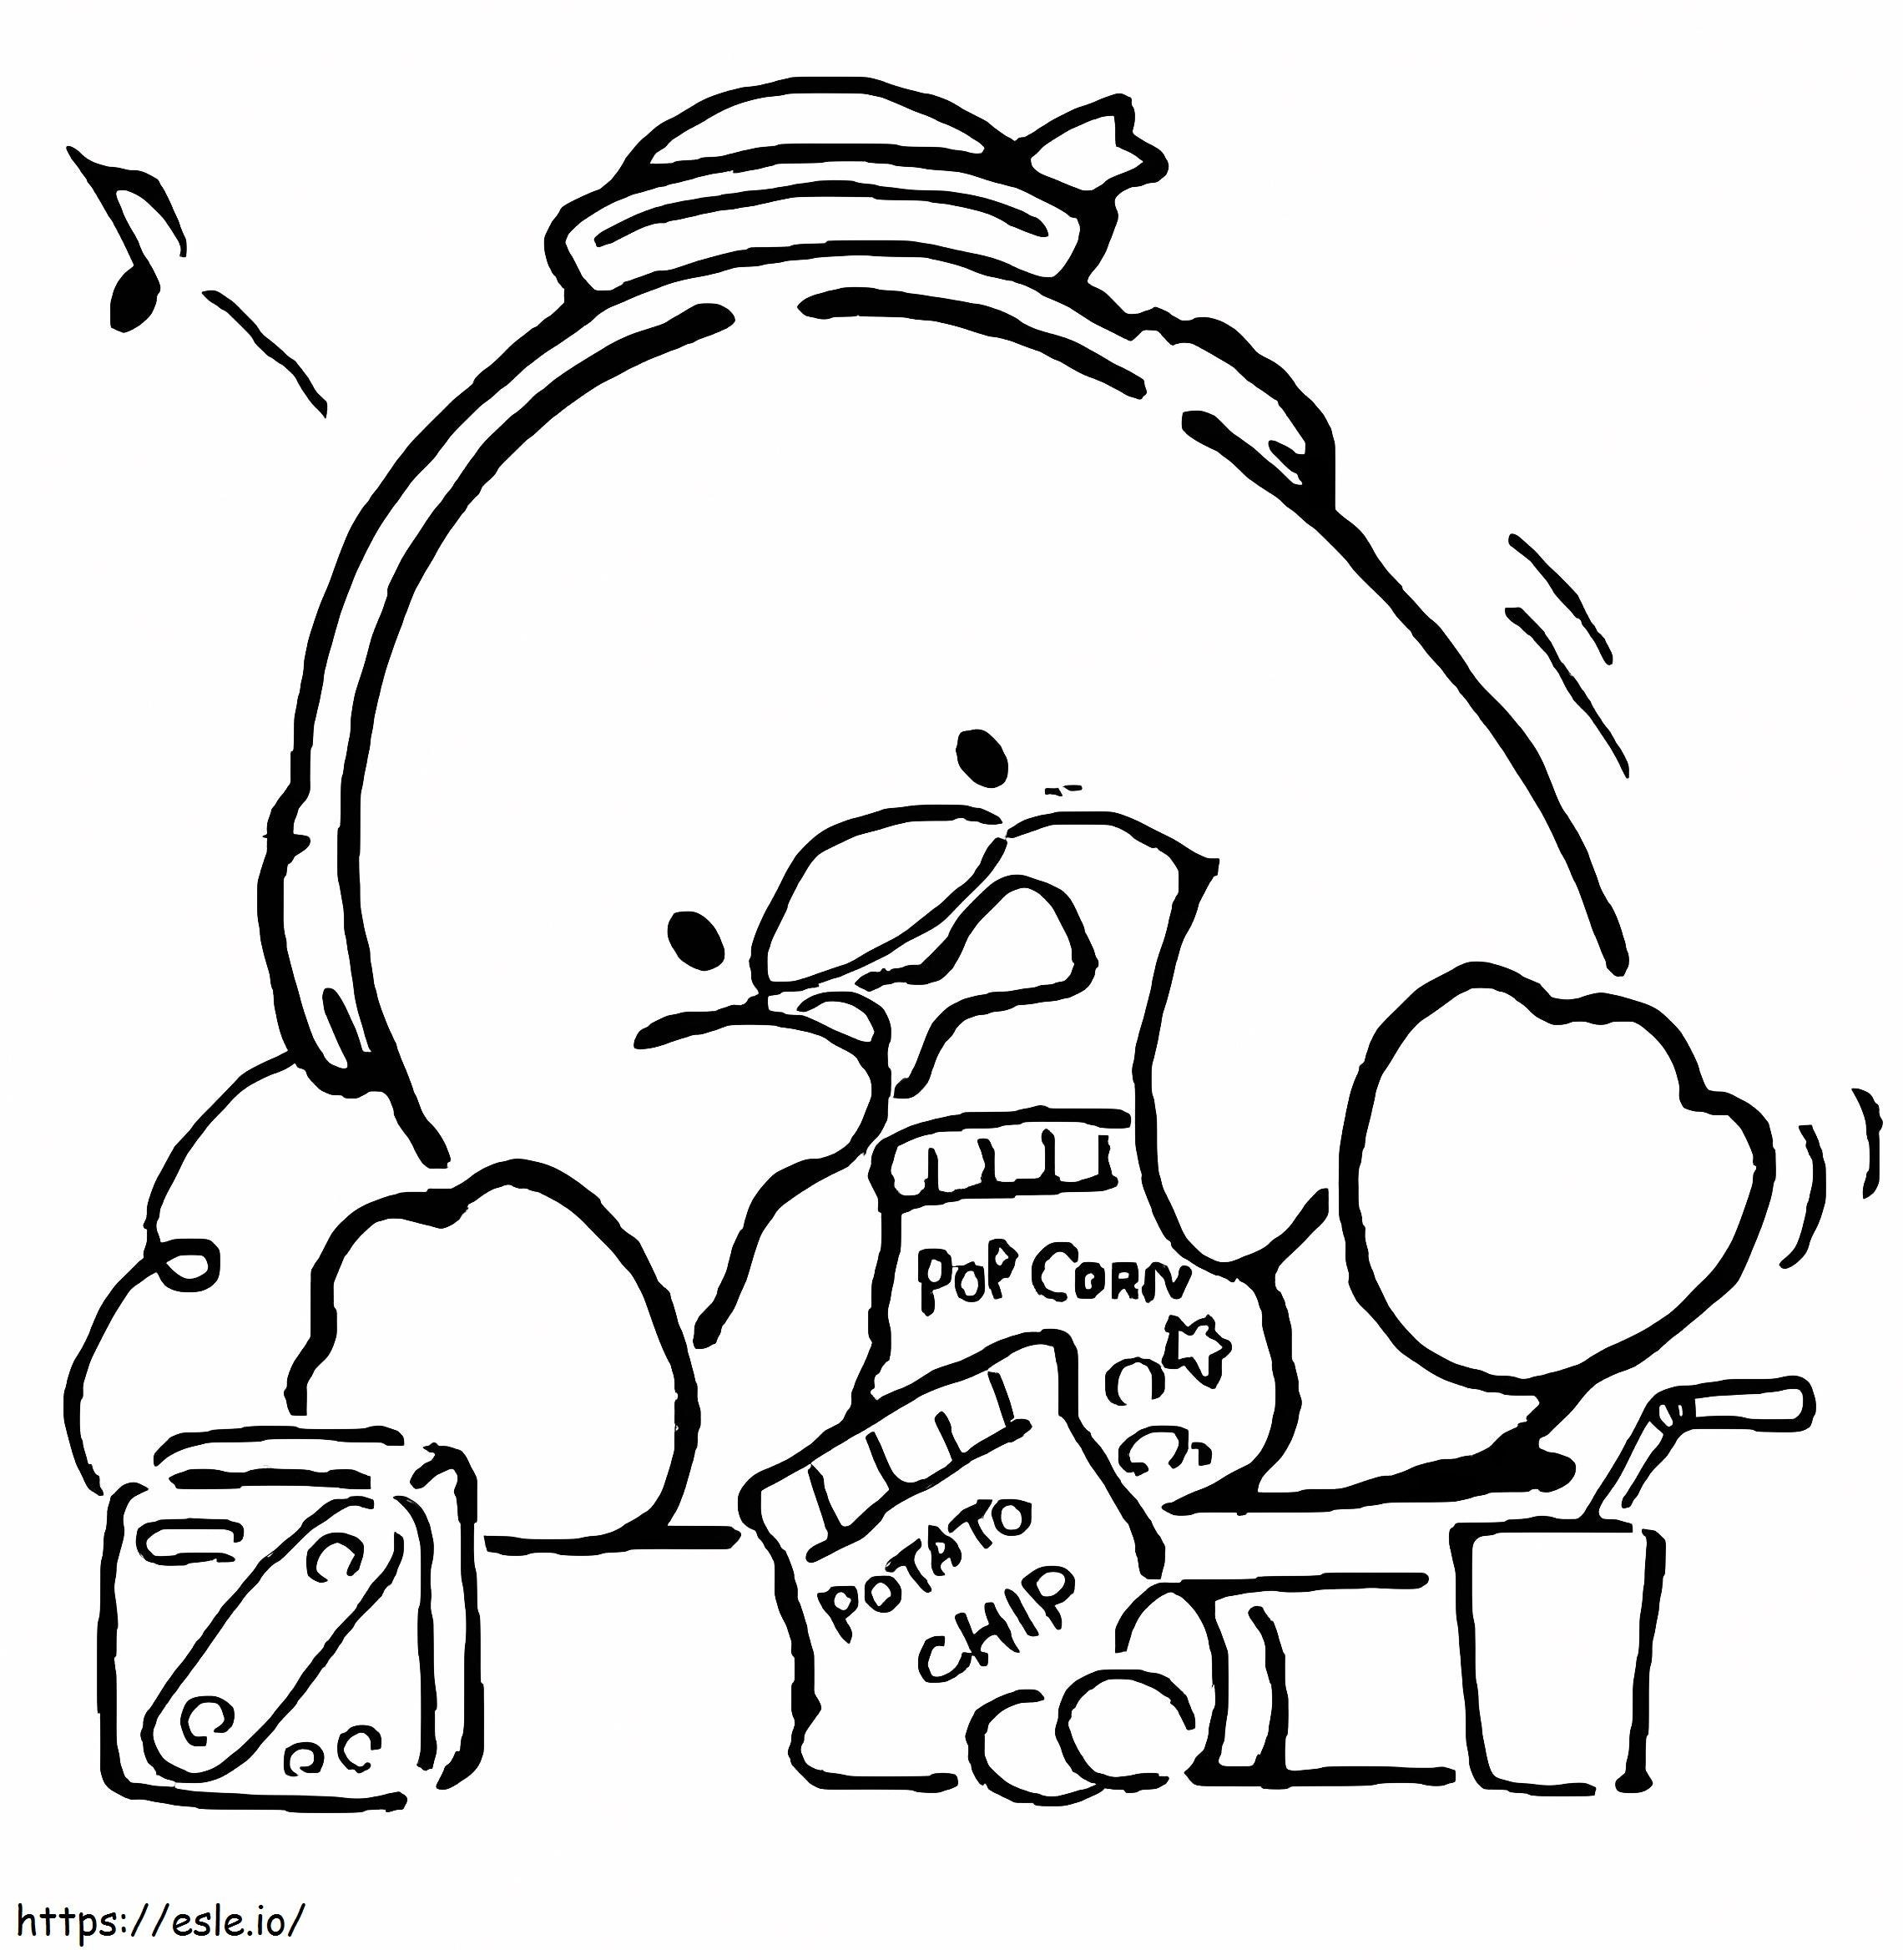 Tuxedo Sam Is Relaxing coloring page